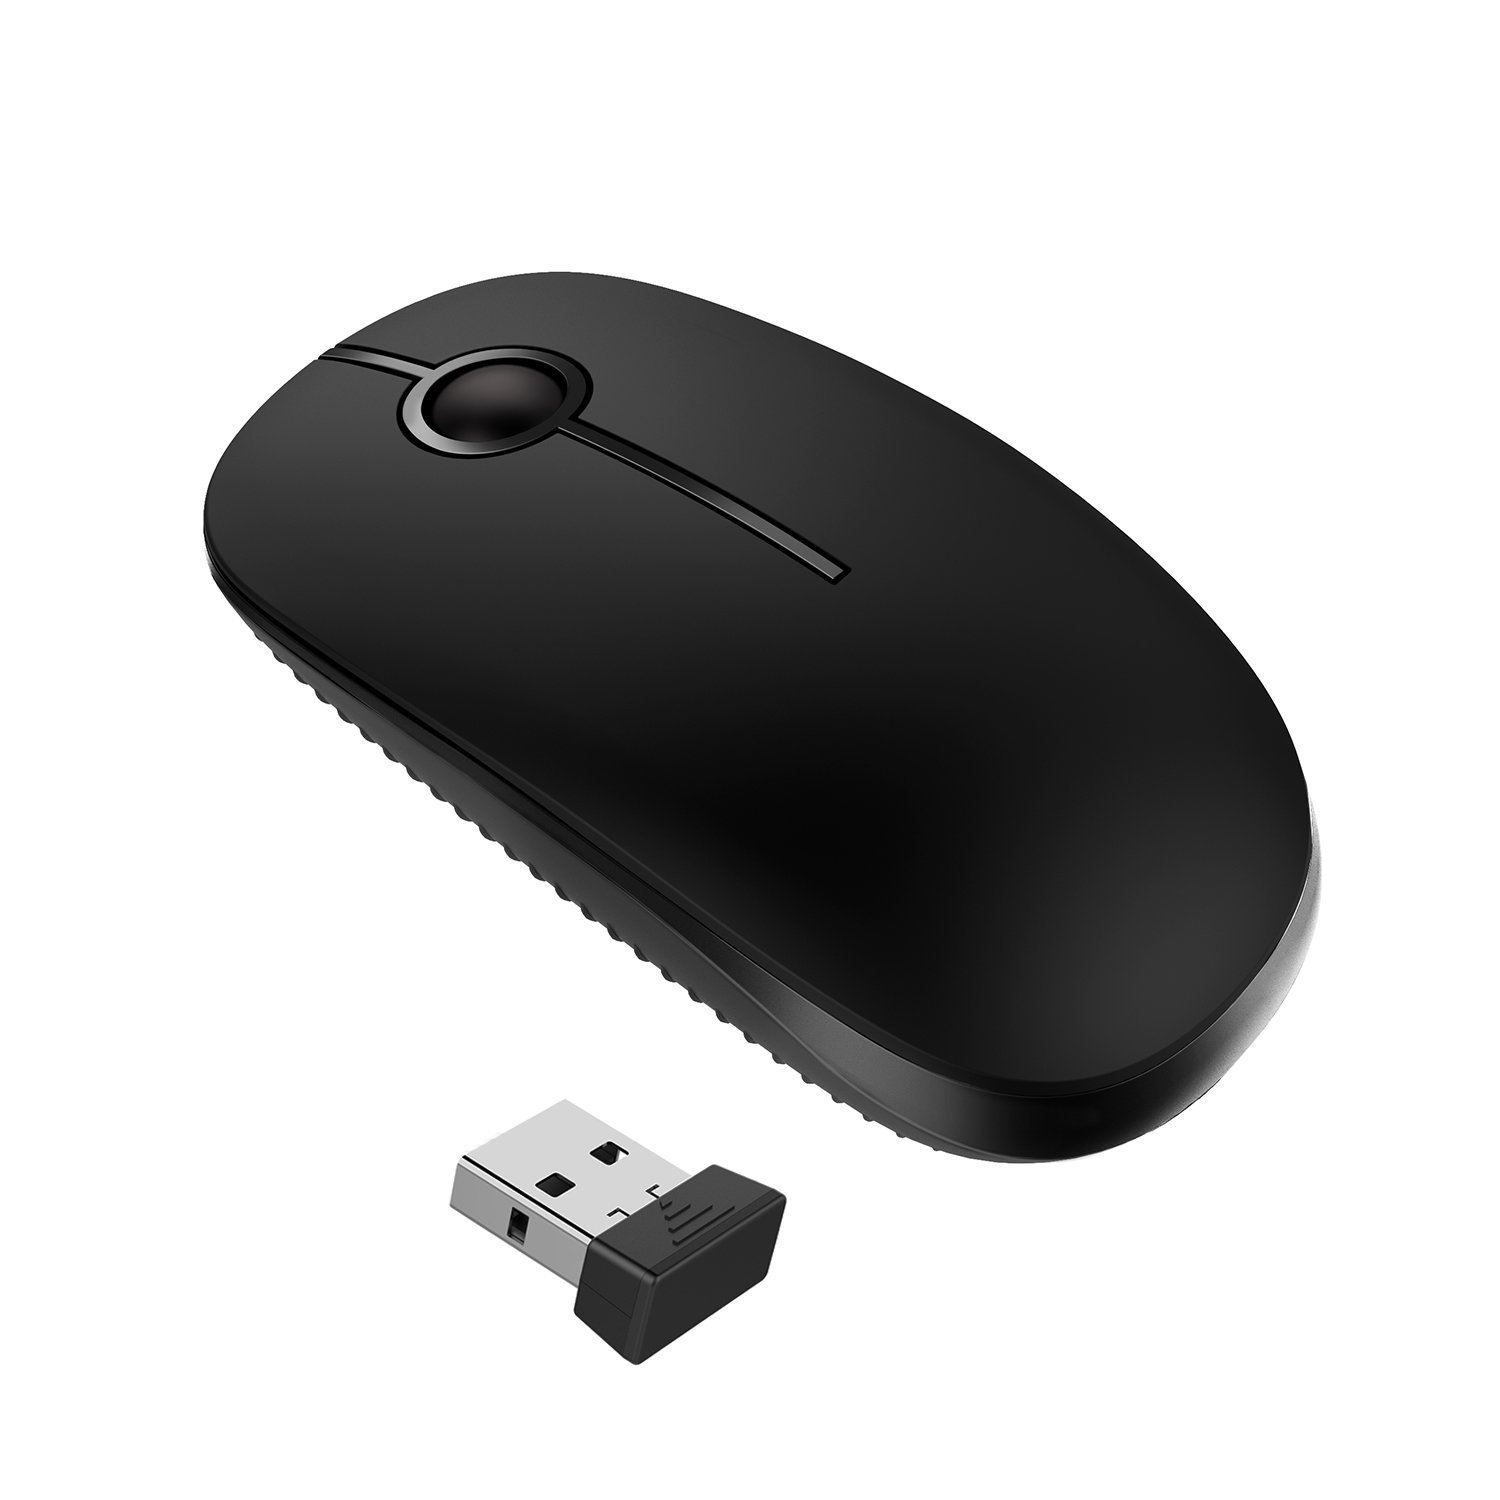 Book Cover VssoPlor Wireless Mouse, 2.4G Slim Portable Computer Mice with Nano Receiver for Notebook, PC, Laptop, Computer-Black